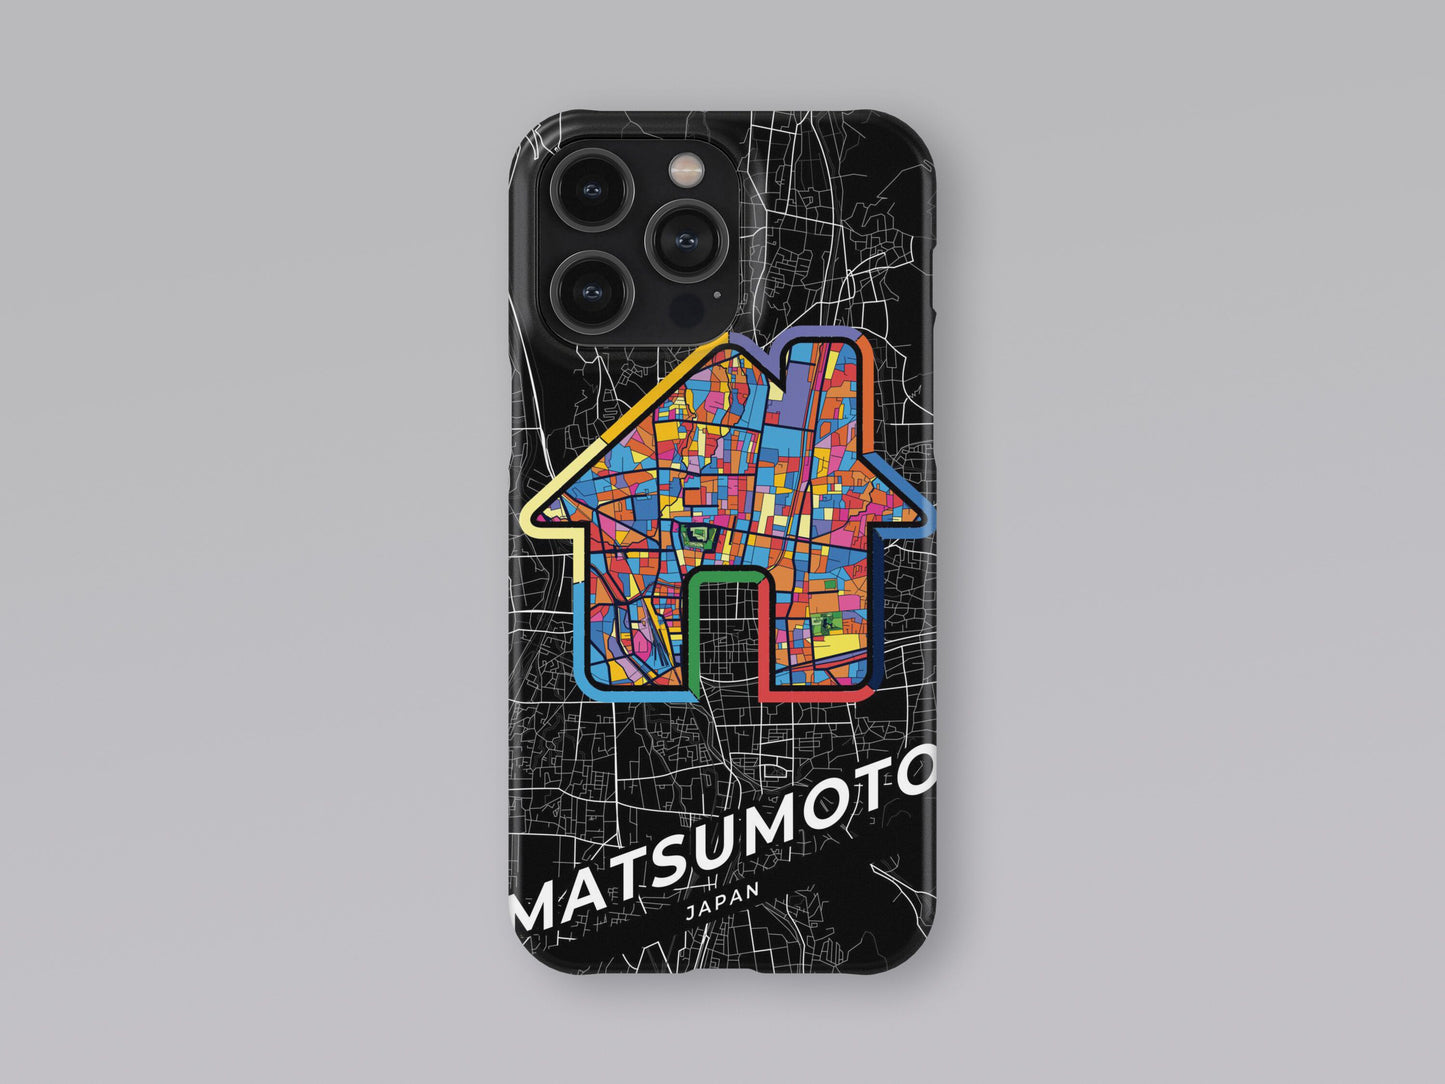 Matsumoto Japan slim phone case with colorful icon. Birthday, wedding or housewarming gift. Couple match cases. 3